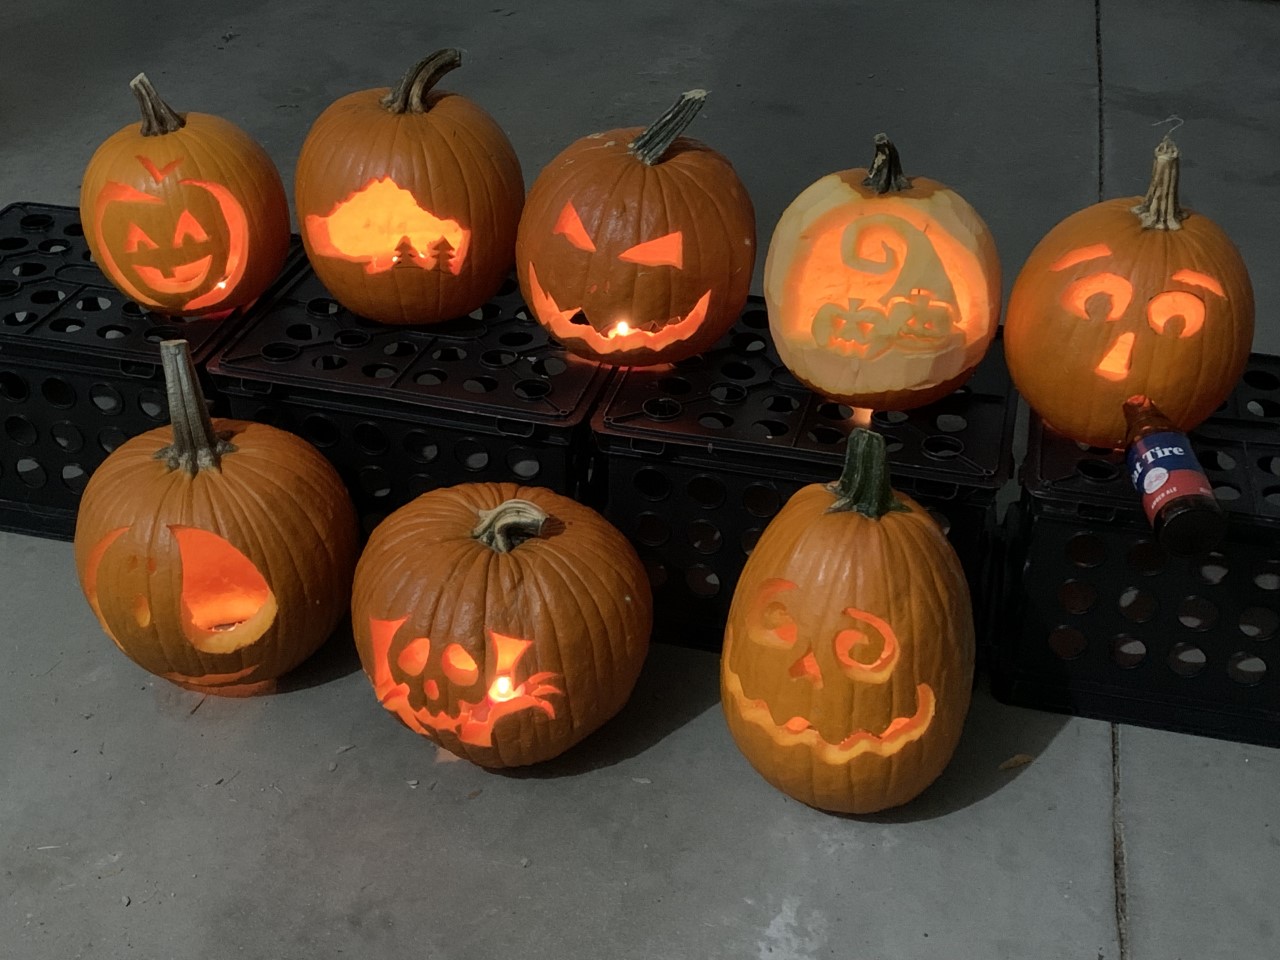 All of the carved pumpkins in the daylight